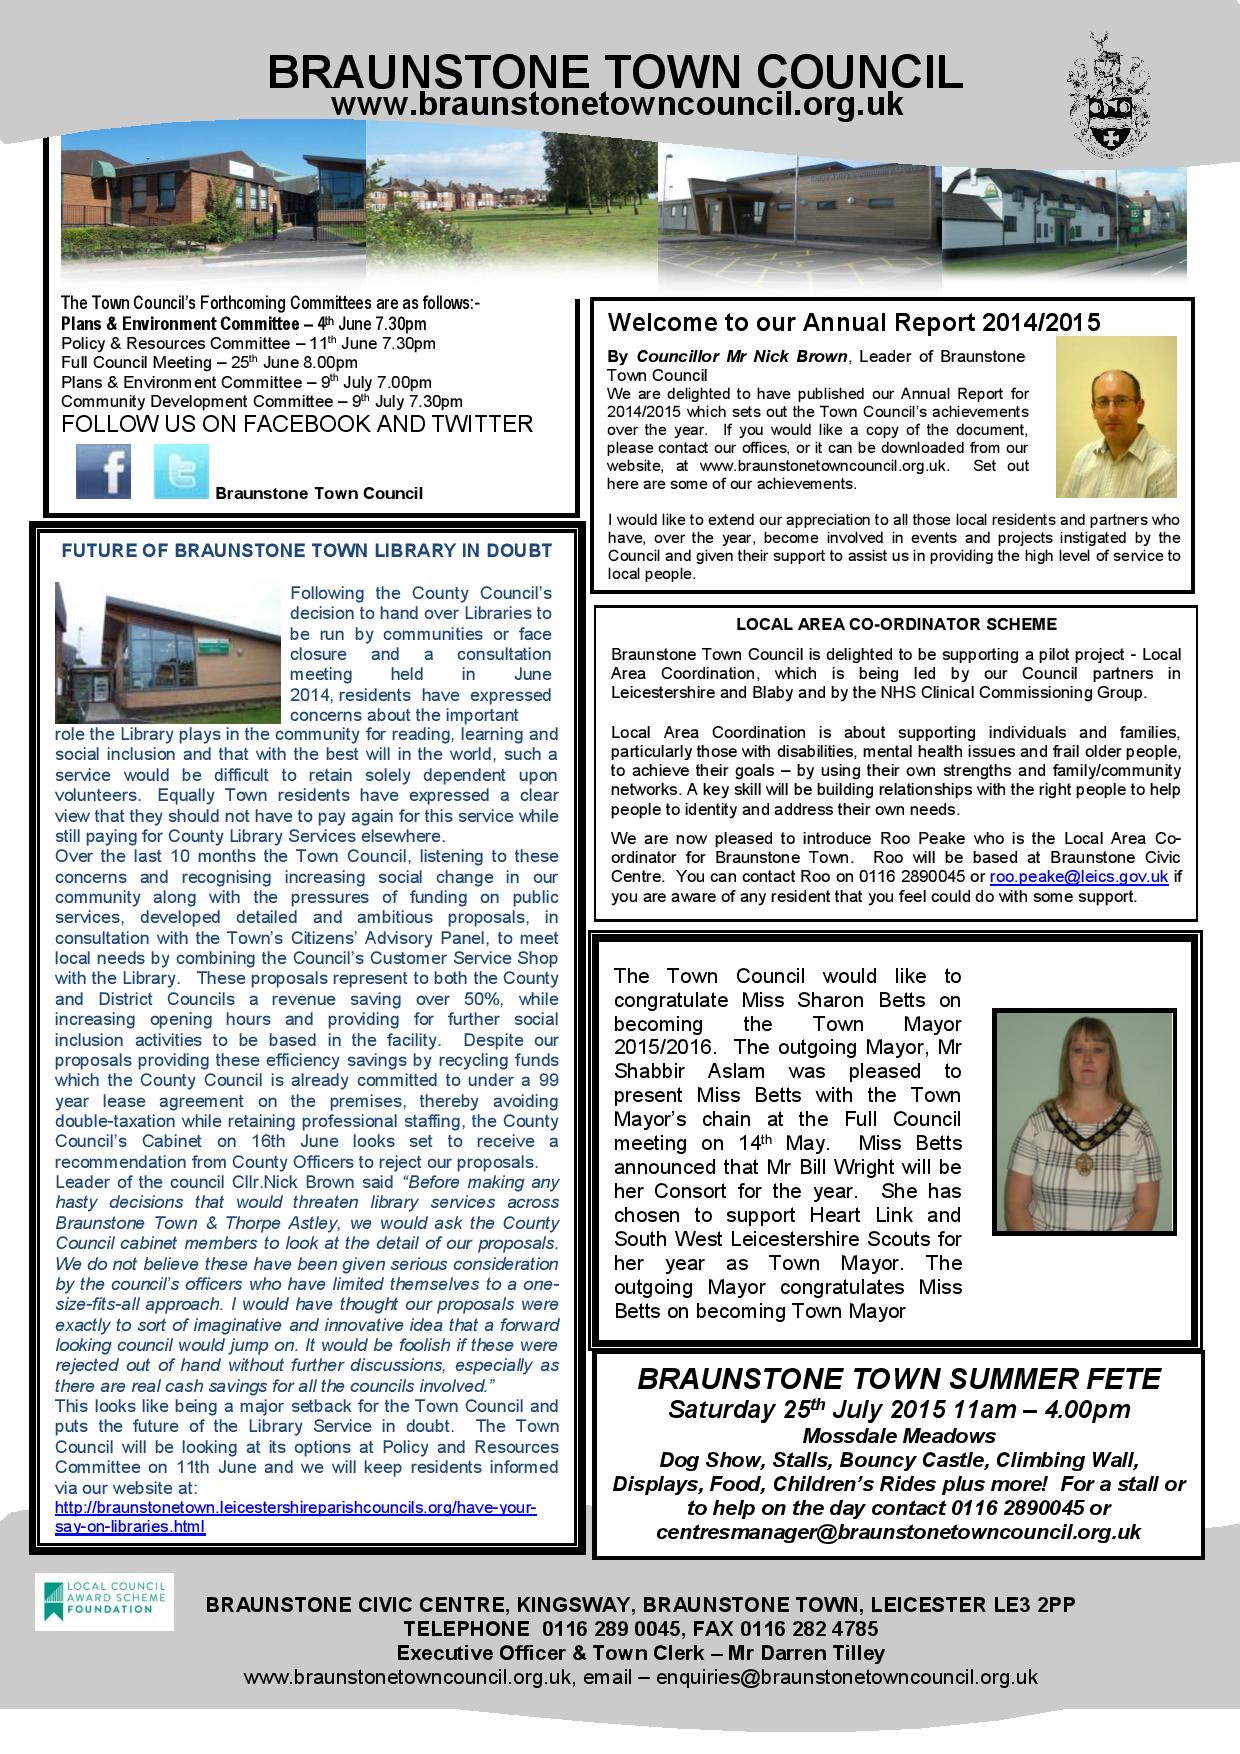 The Town Council article from the May 2015 issue of the Braunstone Life